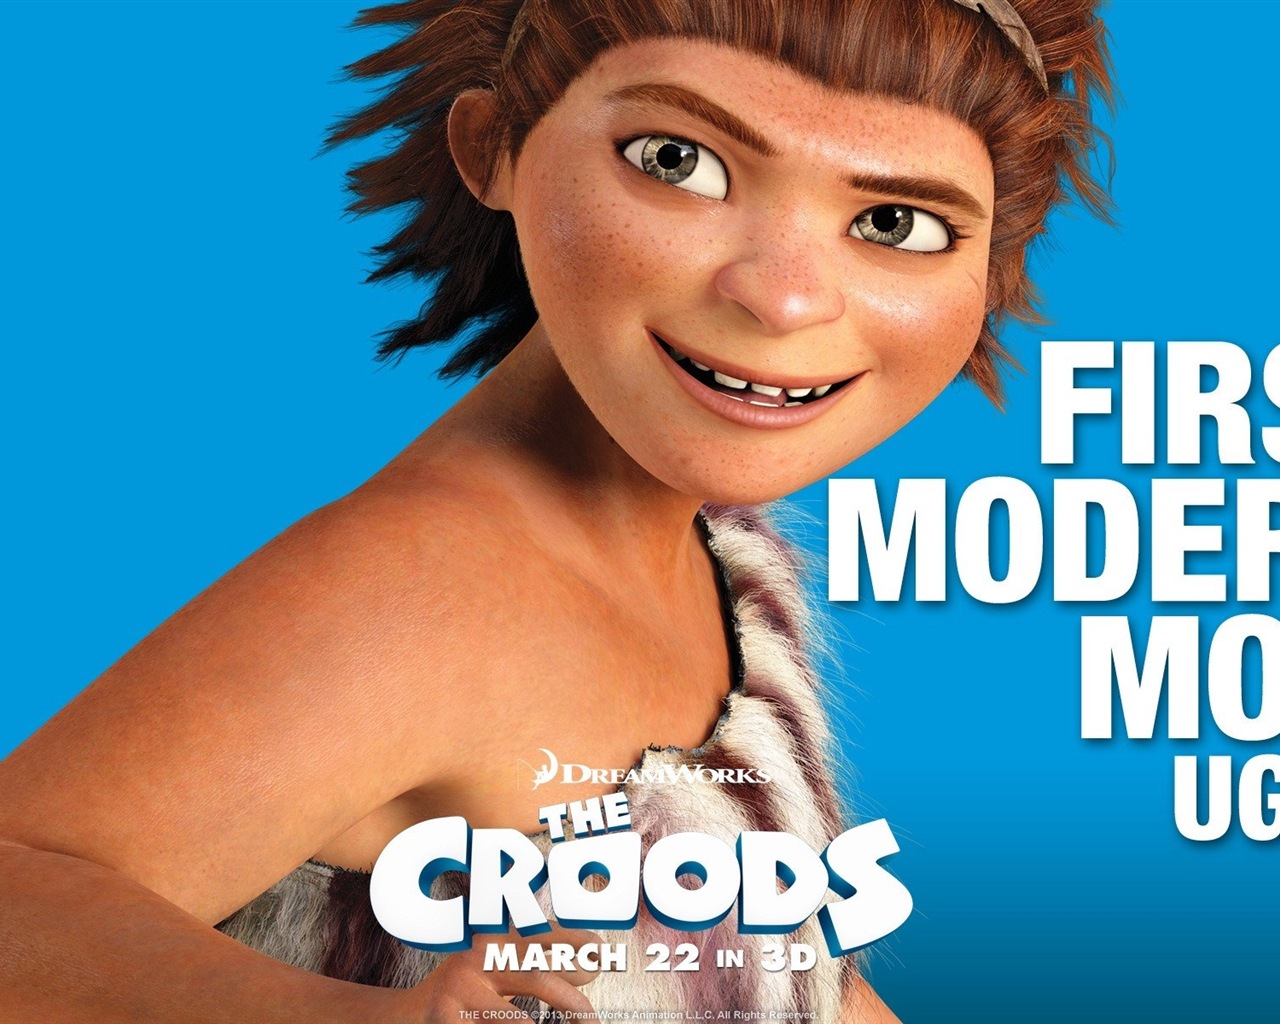 V Croods HD Movie Wallpapers #7 - 1280x1024